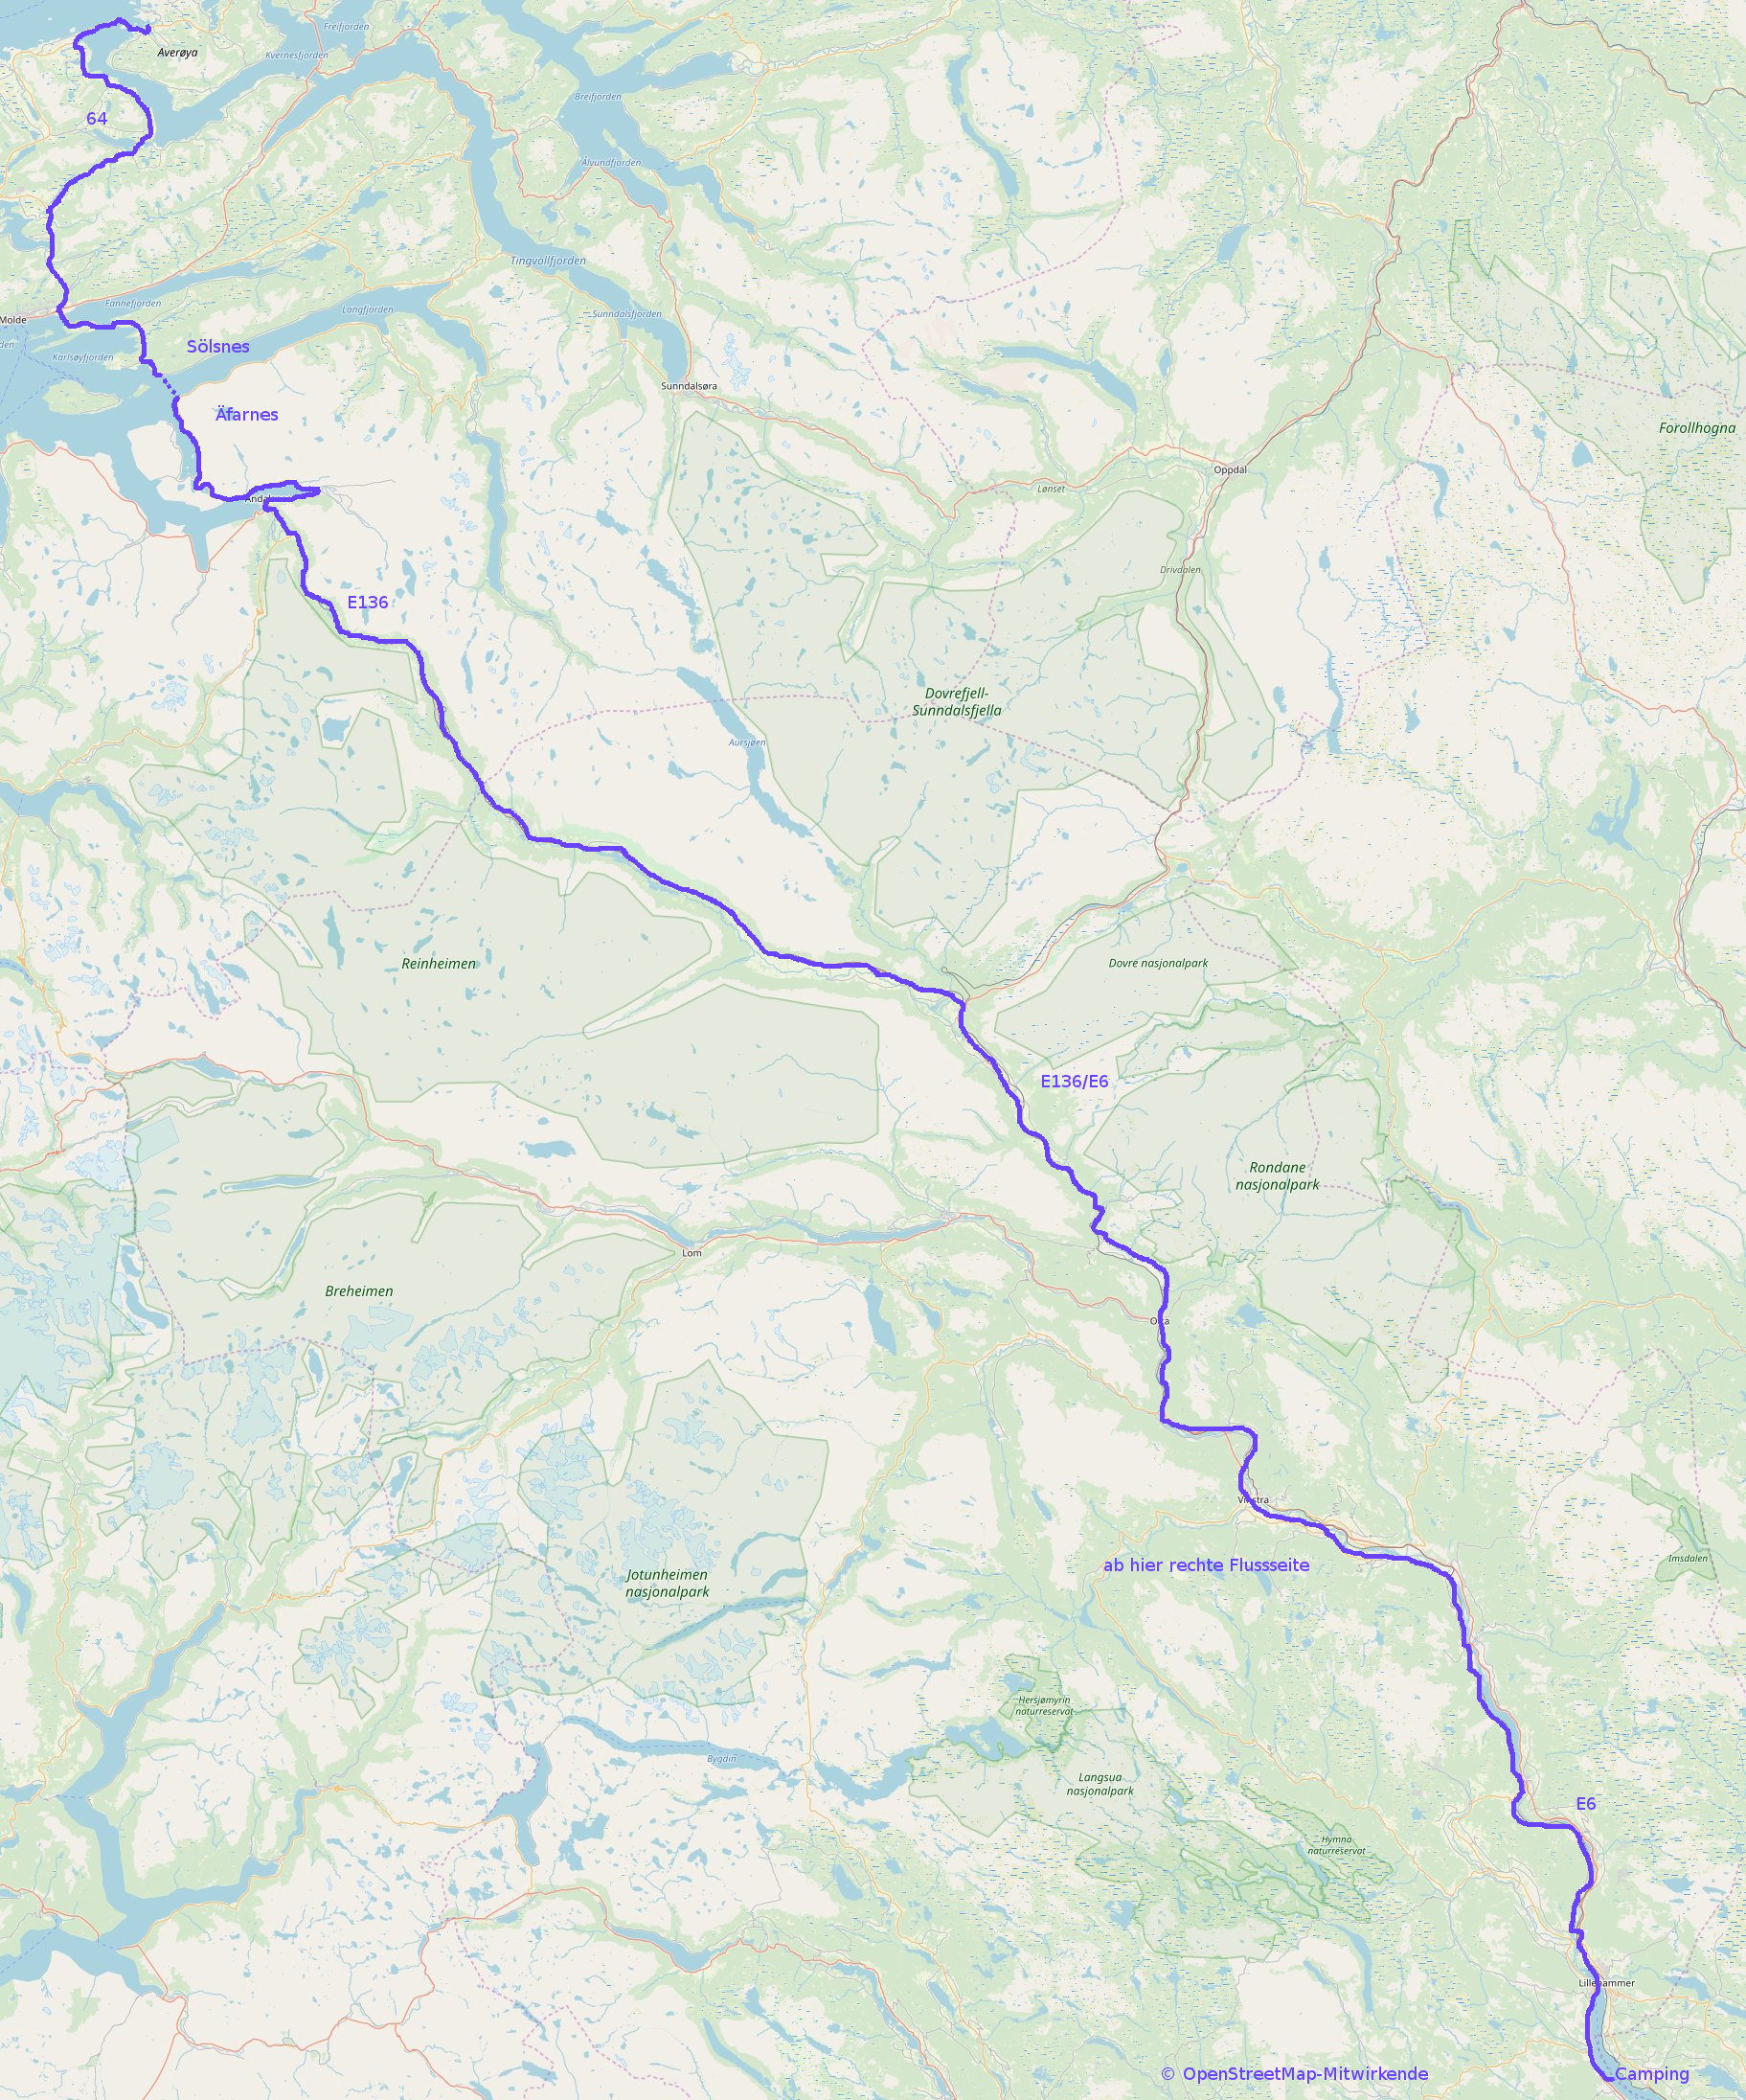 Route day 18